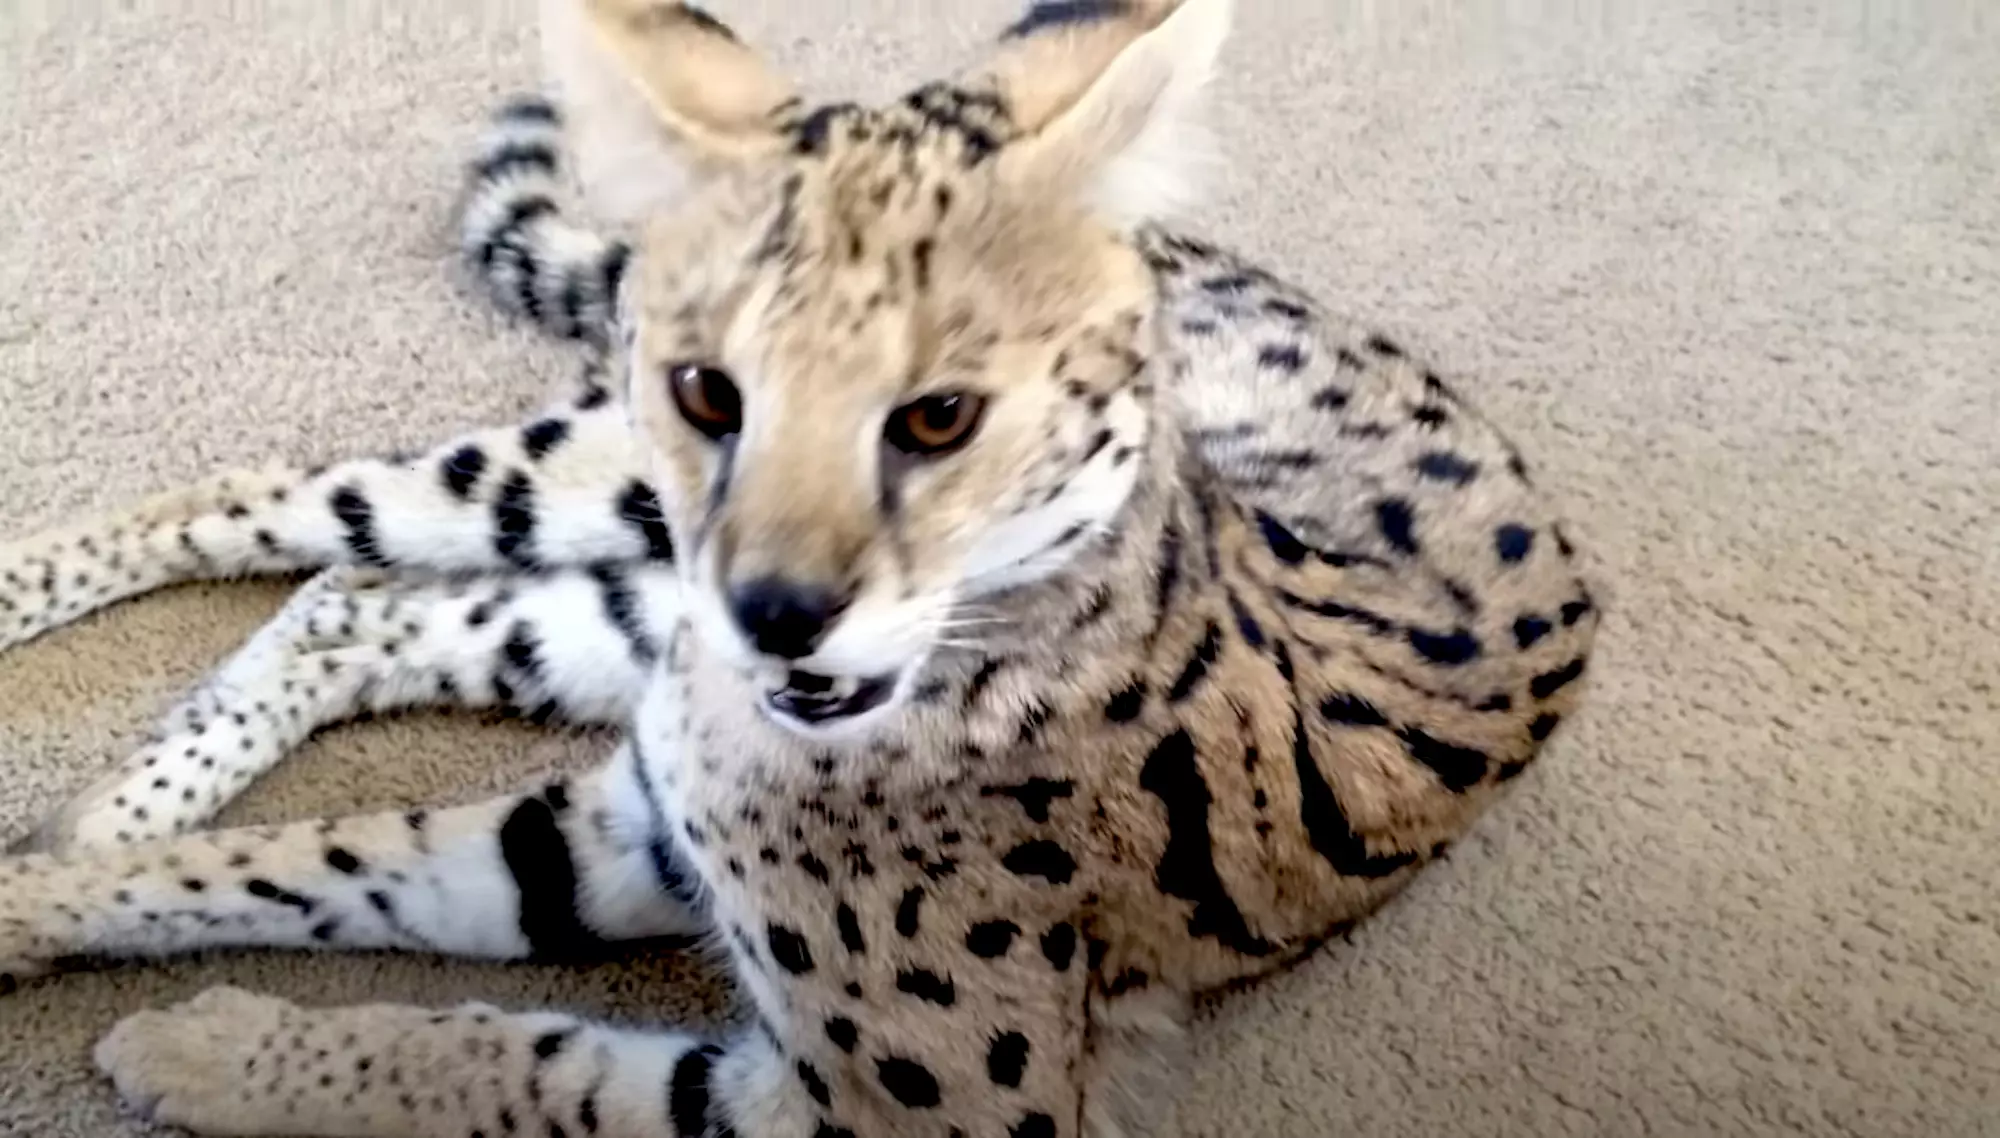 A Savannah cat - the type the couple thought they were buying.